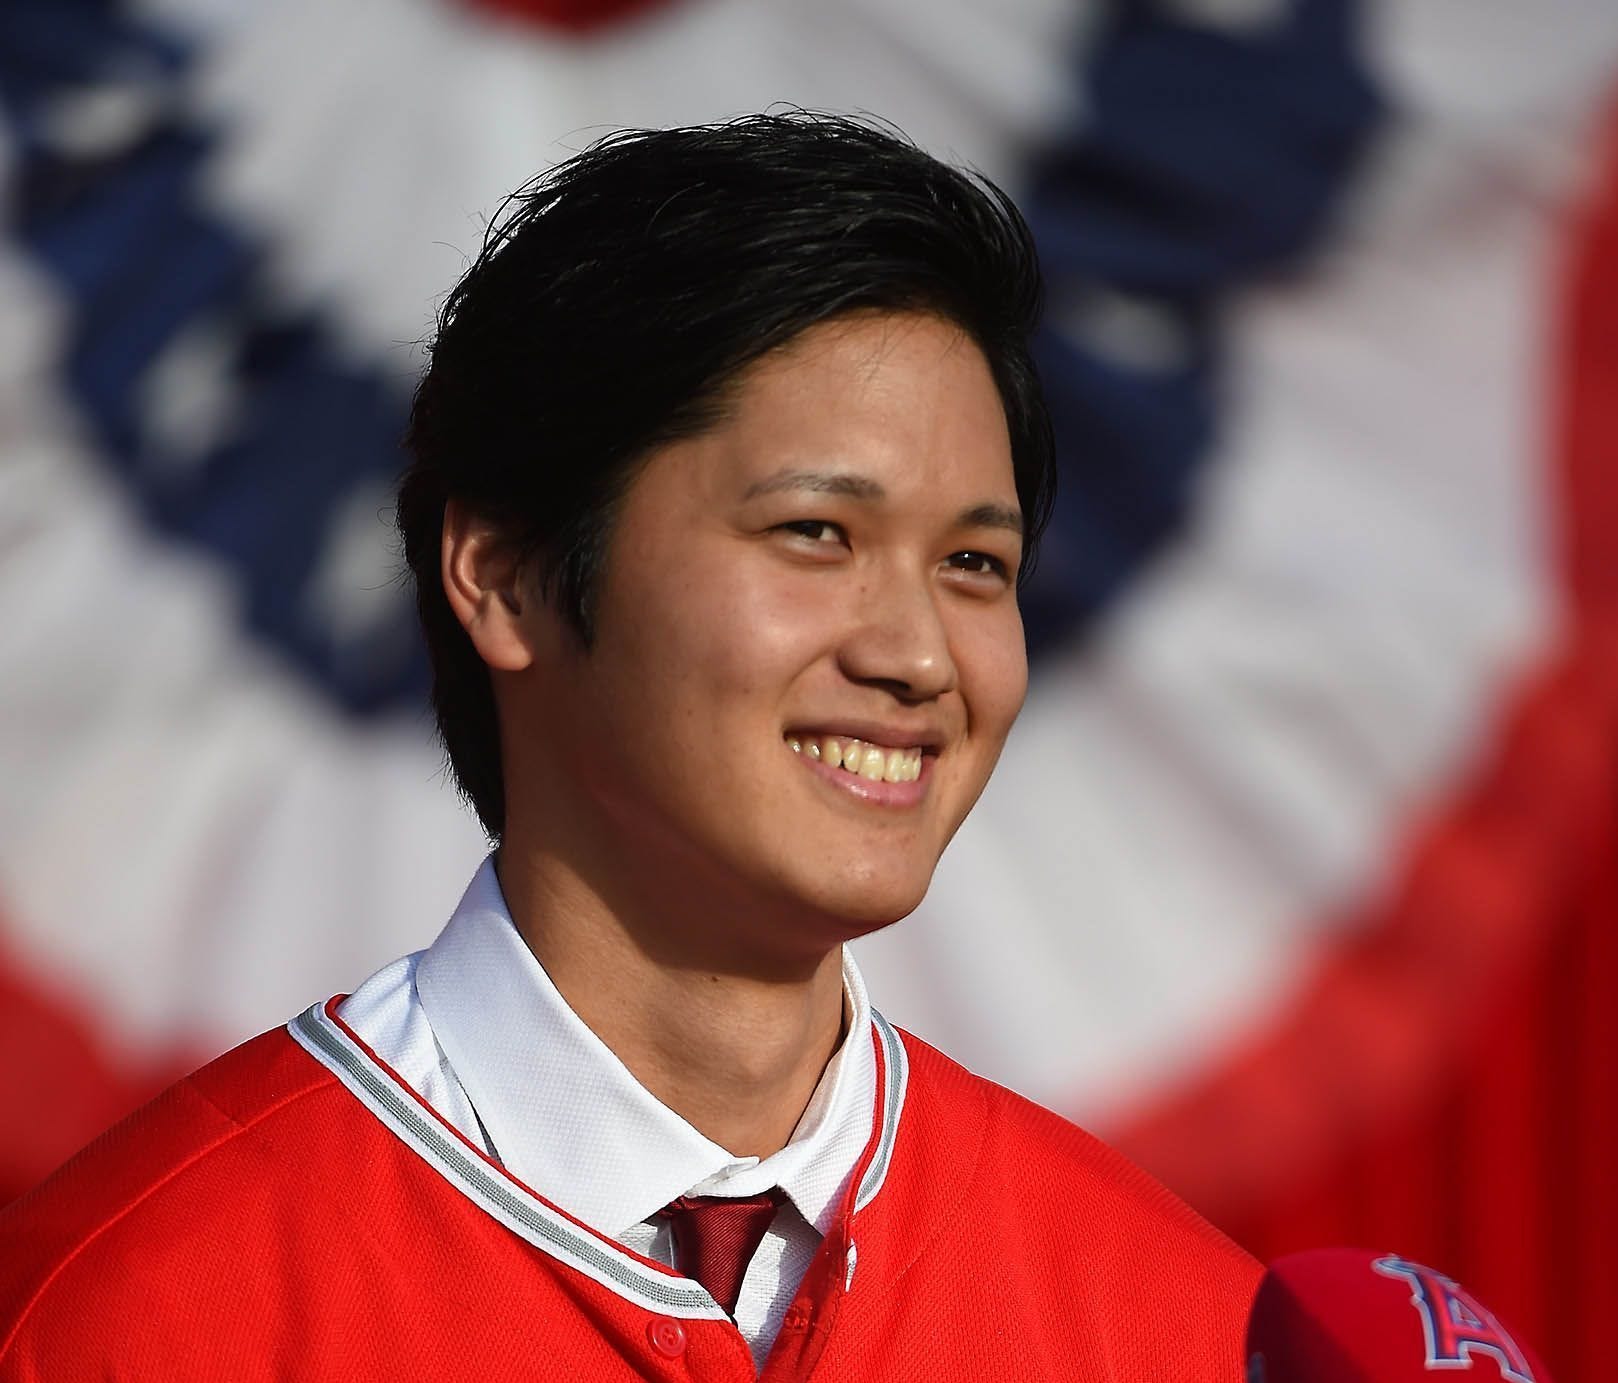 Shohei Ohtani is expected to pitch and bat for the Angels this season.